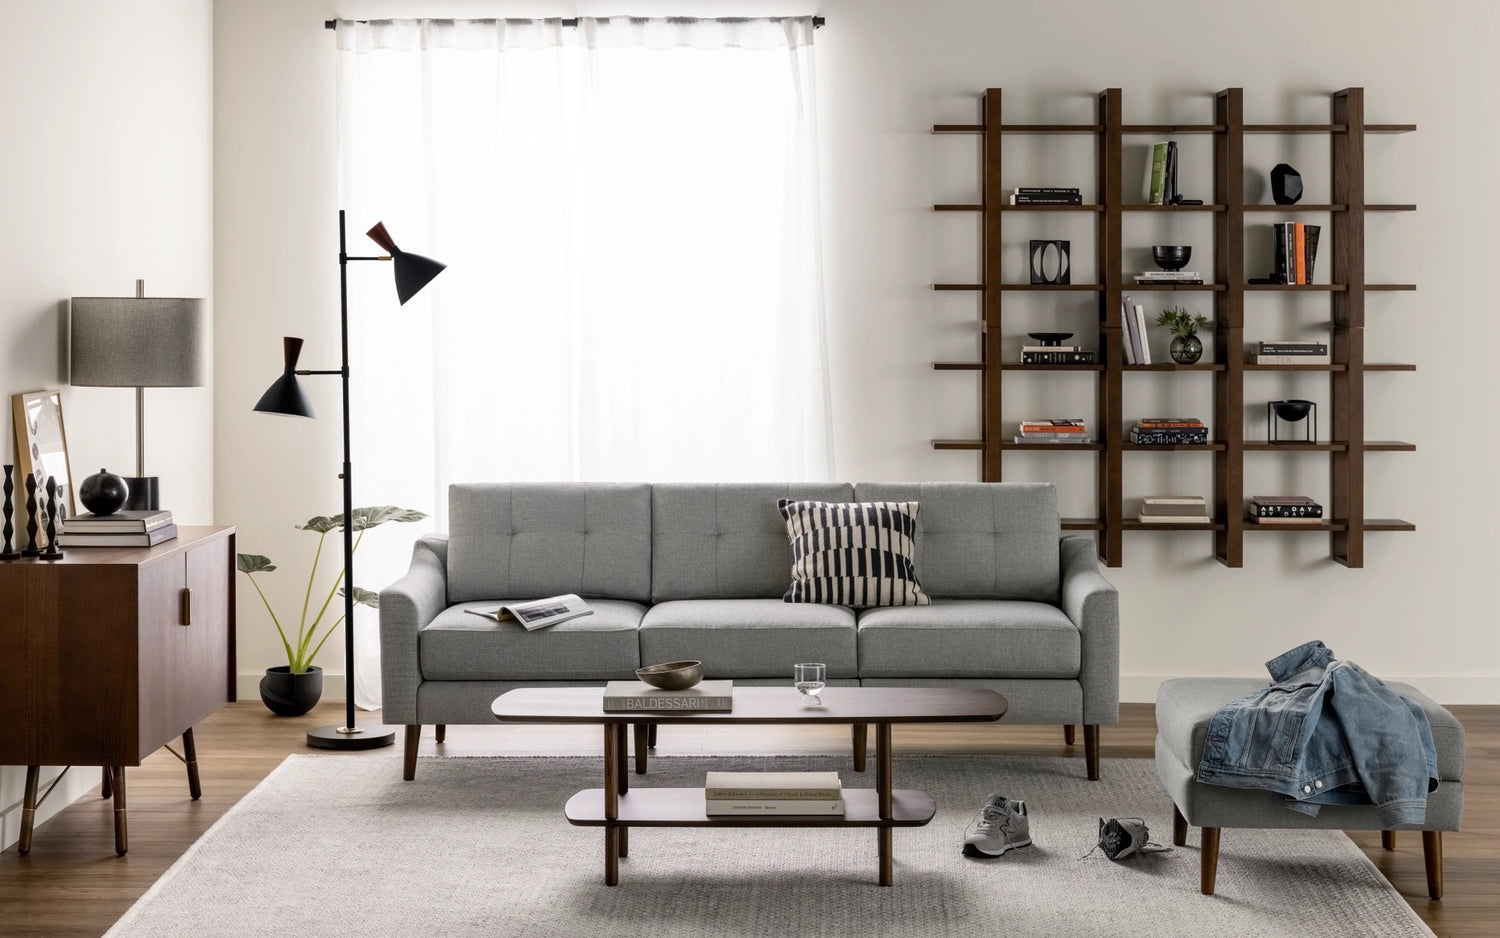 A modern living room featuring a light gray sofa with a striped pillow, a wooden coffee table, a blue armchair with a denim jacket, a wooden cabinet with a lamp, and a floor lamp. A wall-mounted bookshelf holds books and decor. Large window with sheer curtains.